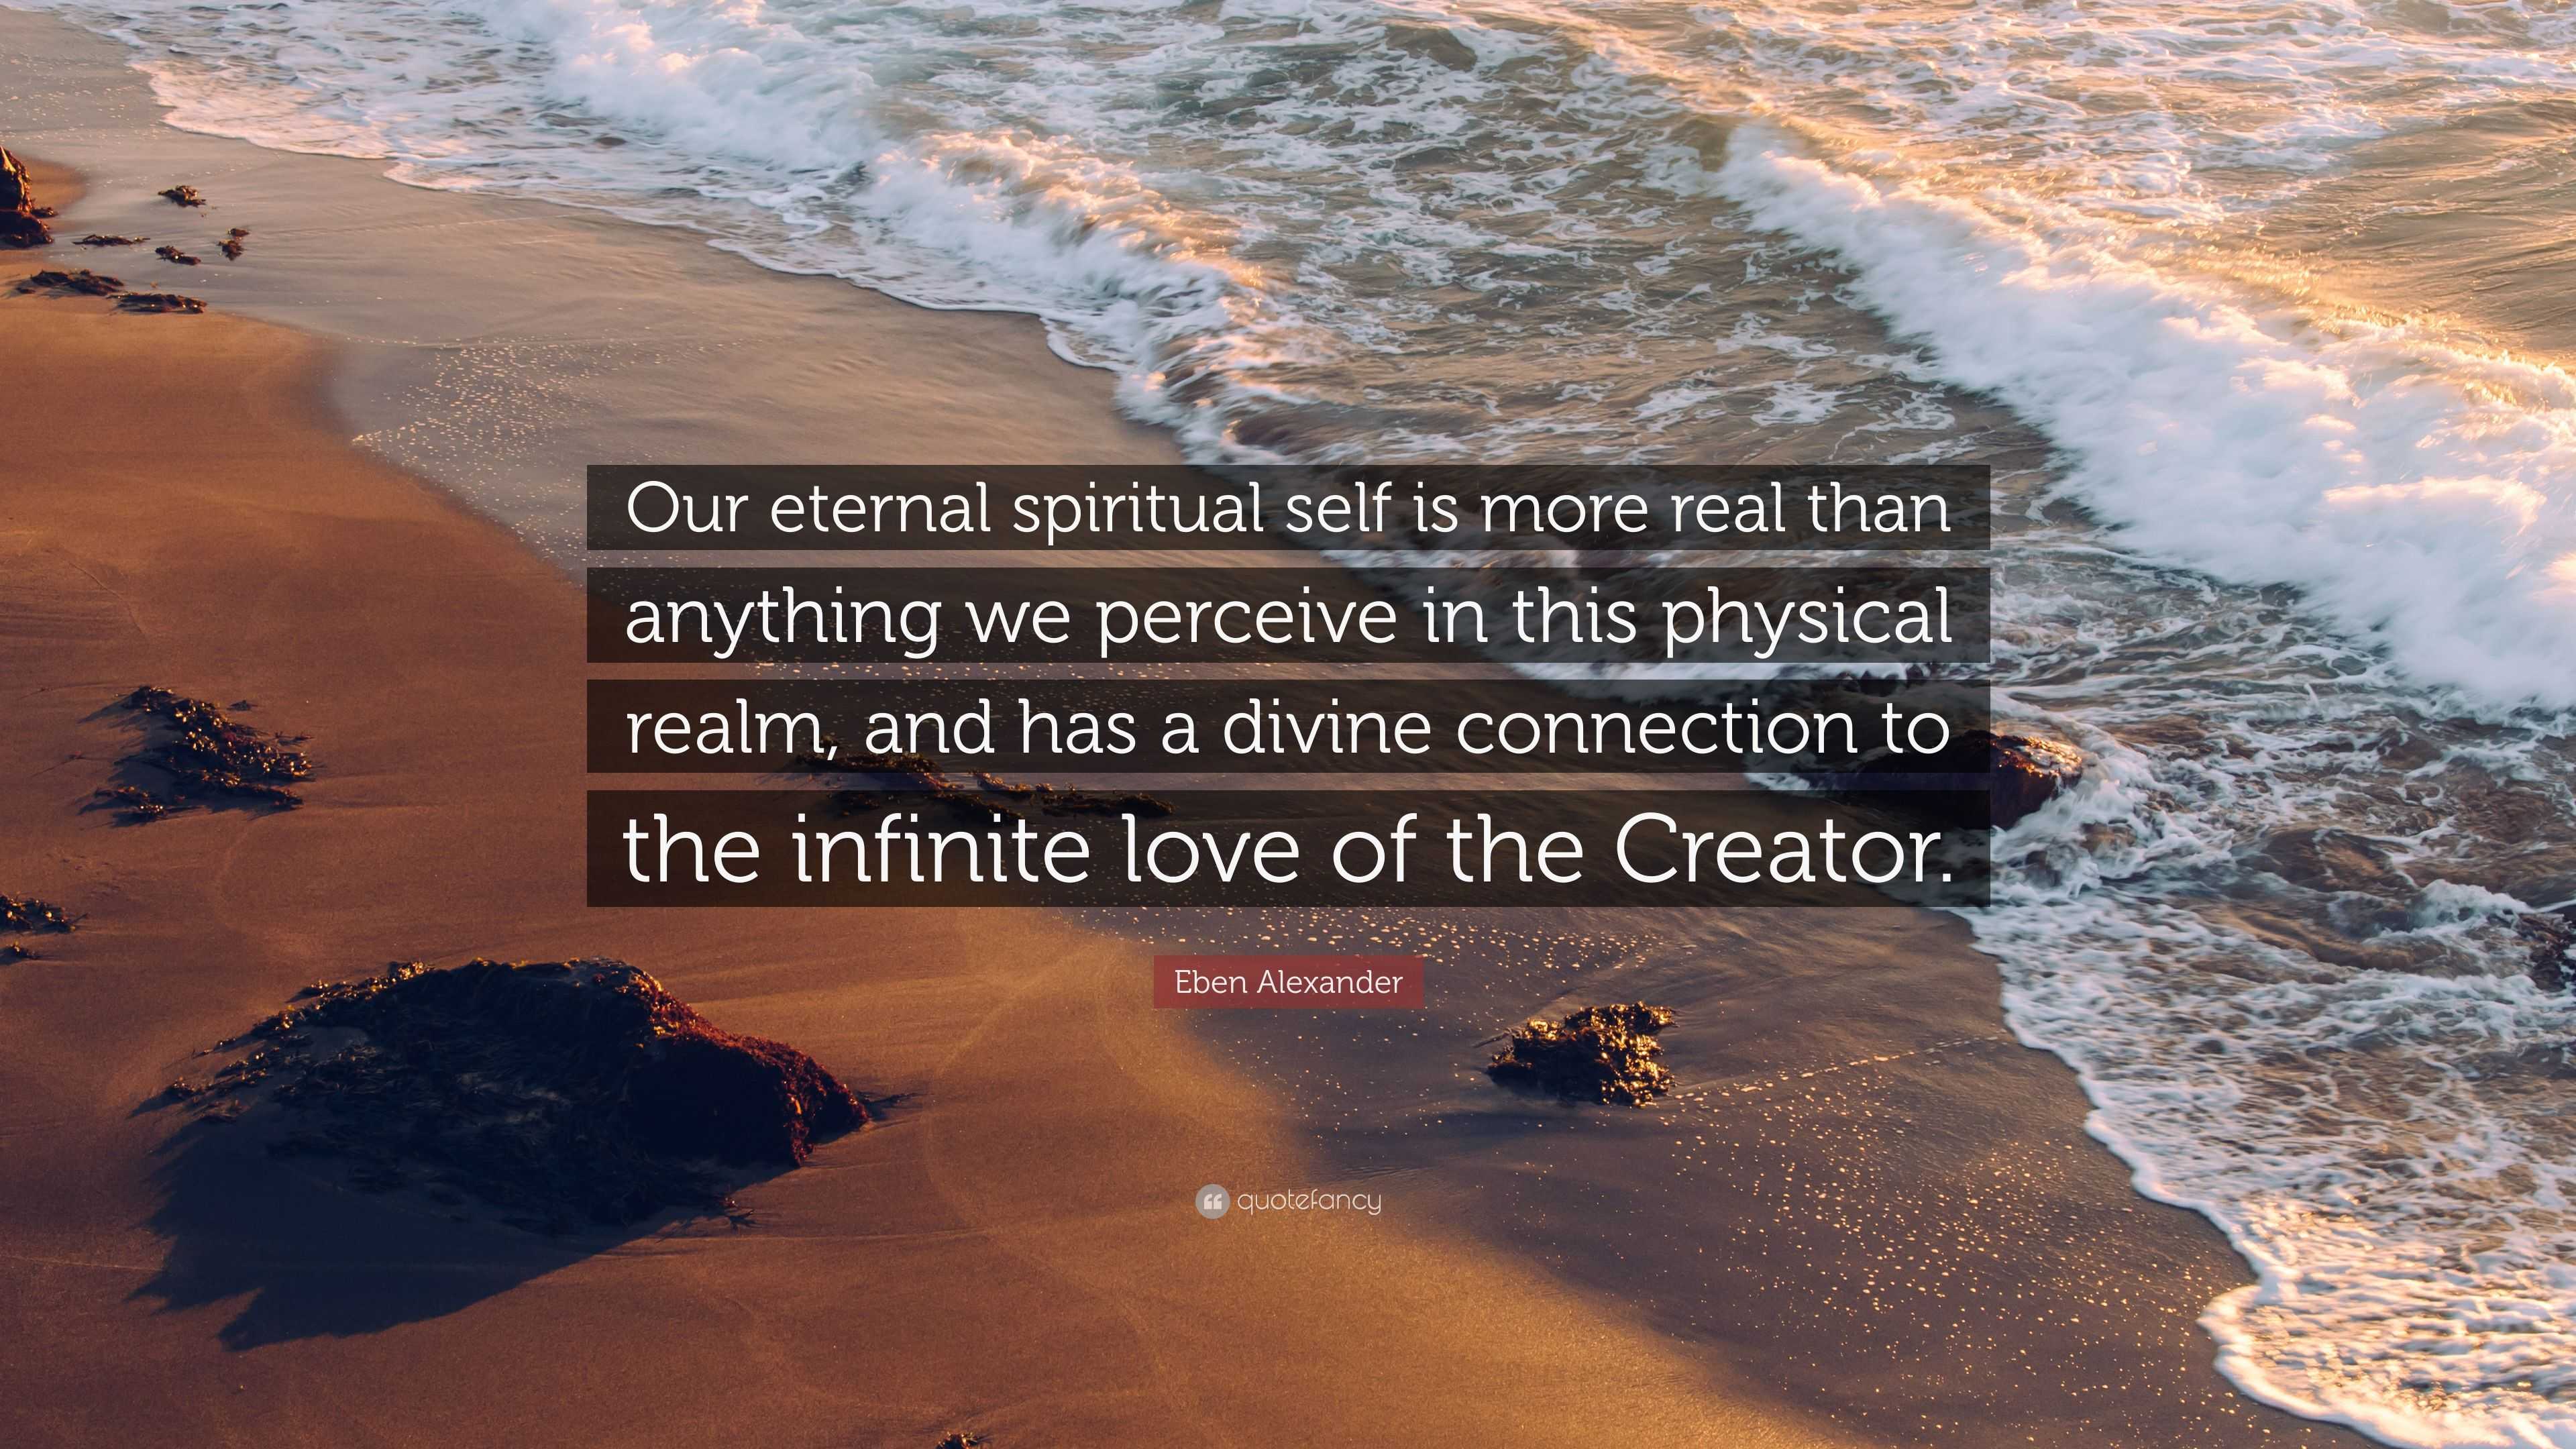 The eternal realm of God we perceive so far beyond our reach is as